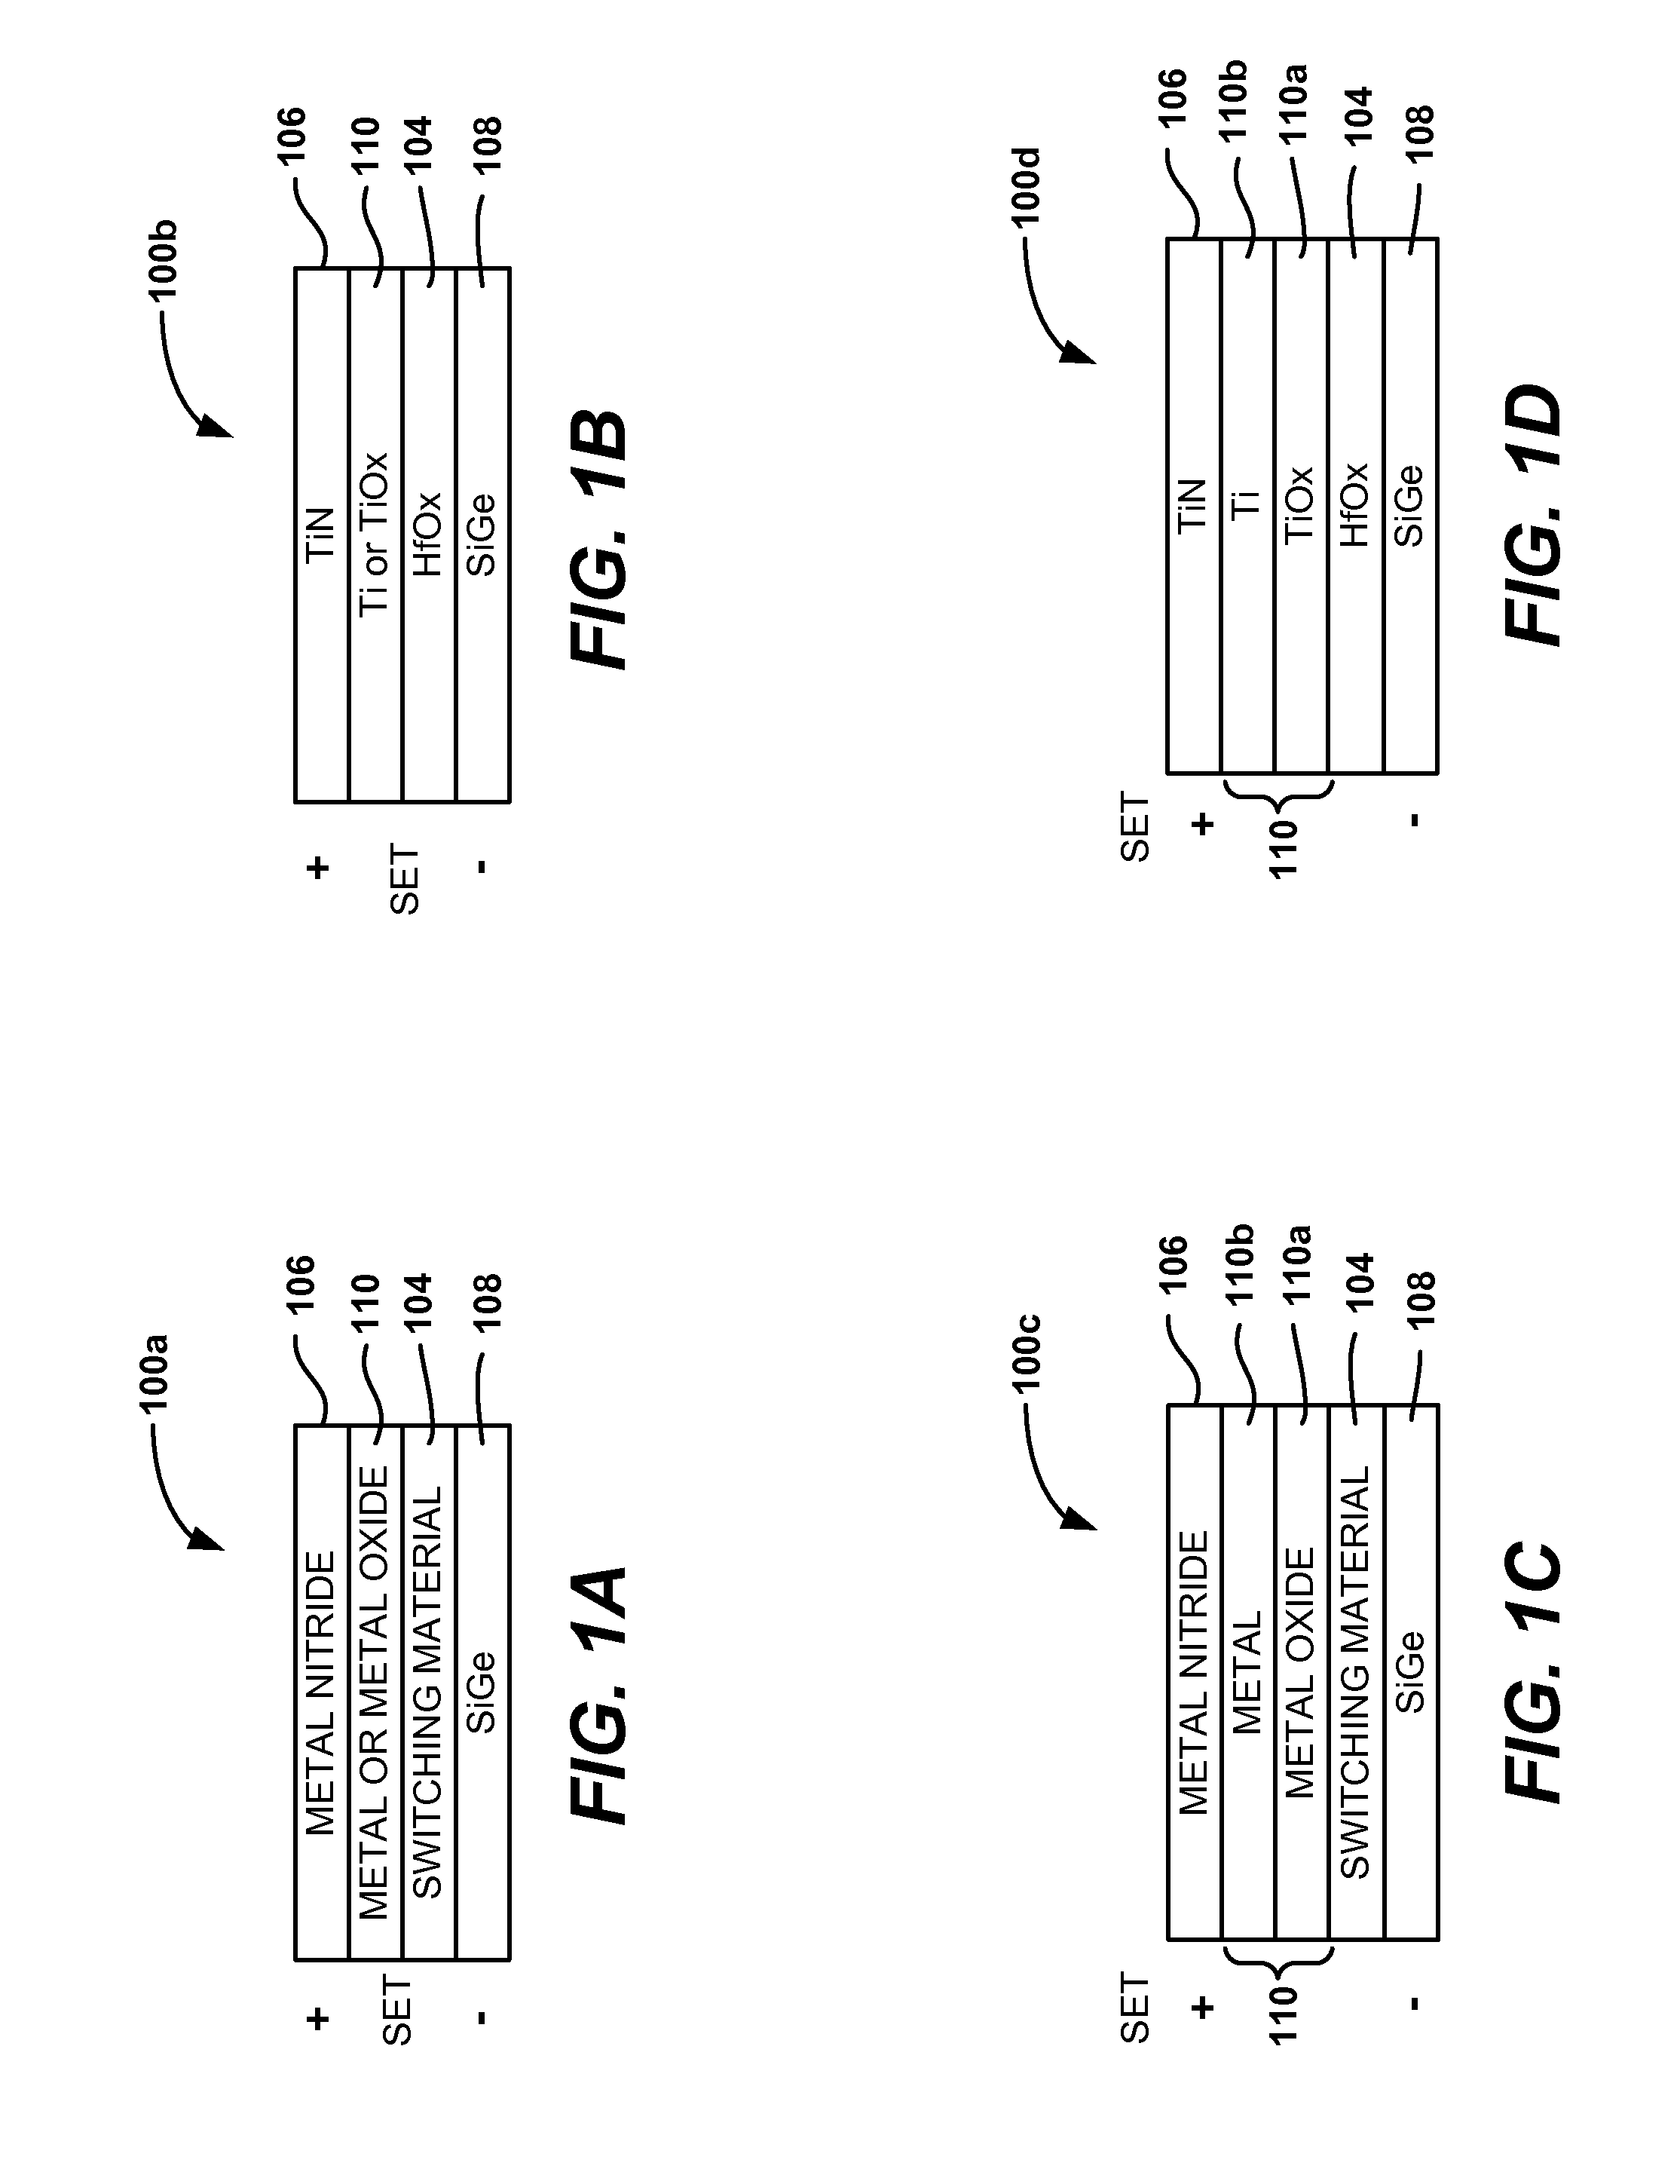 Bottom electrodes for use with metal oxide resistivity switching layers